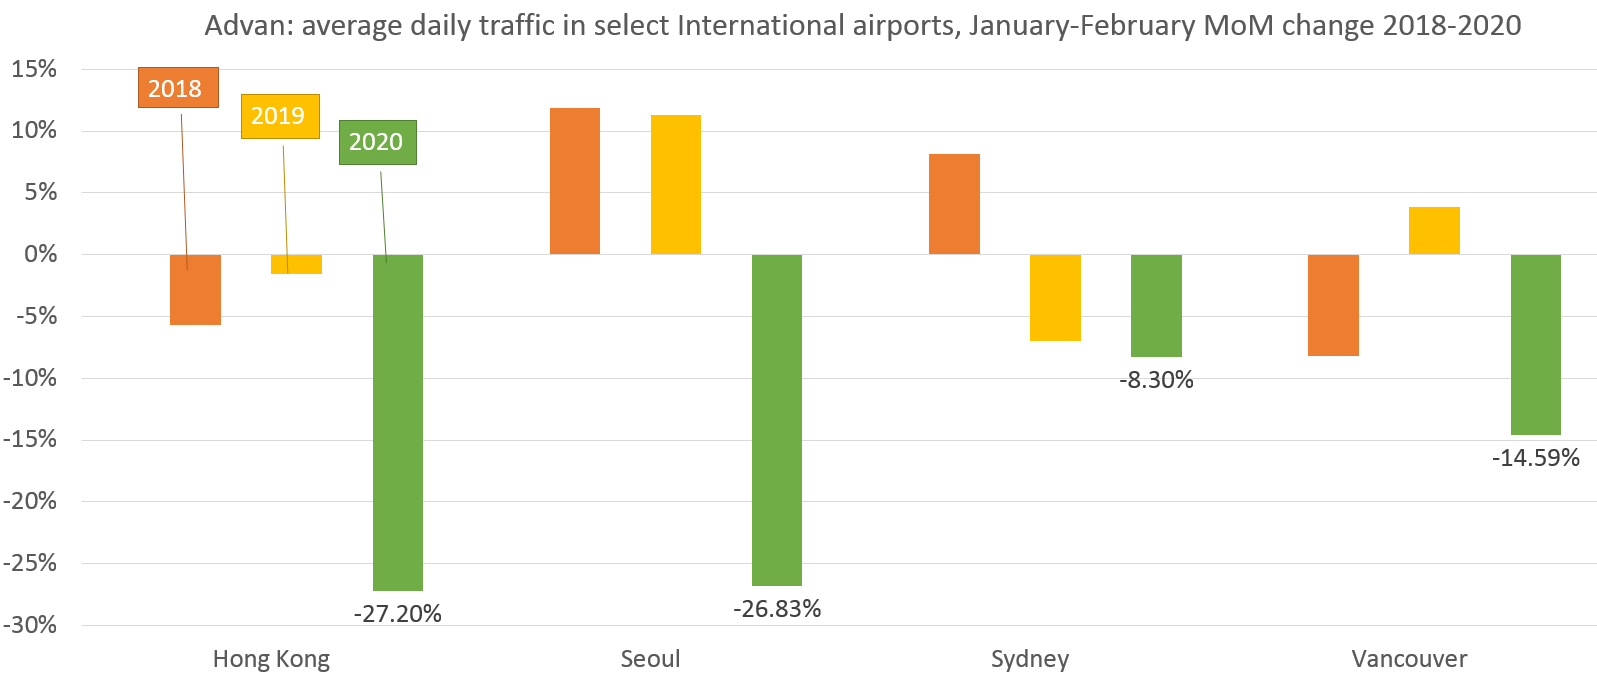 Advan: pct change in airport average daily traffic from January to February 2018 - 2020